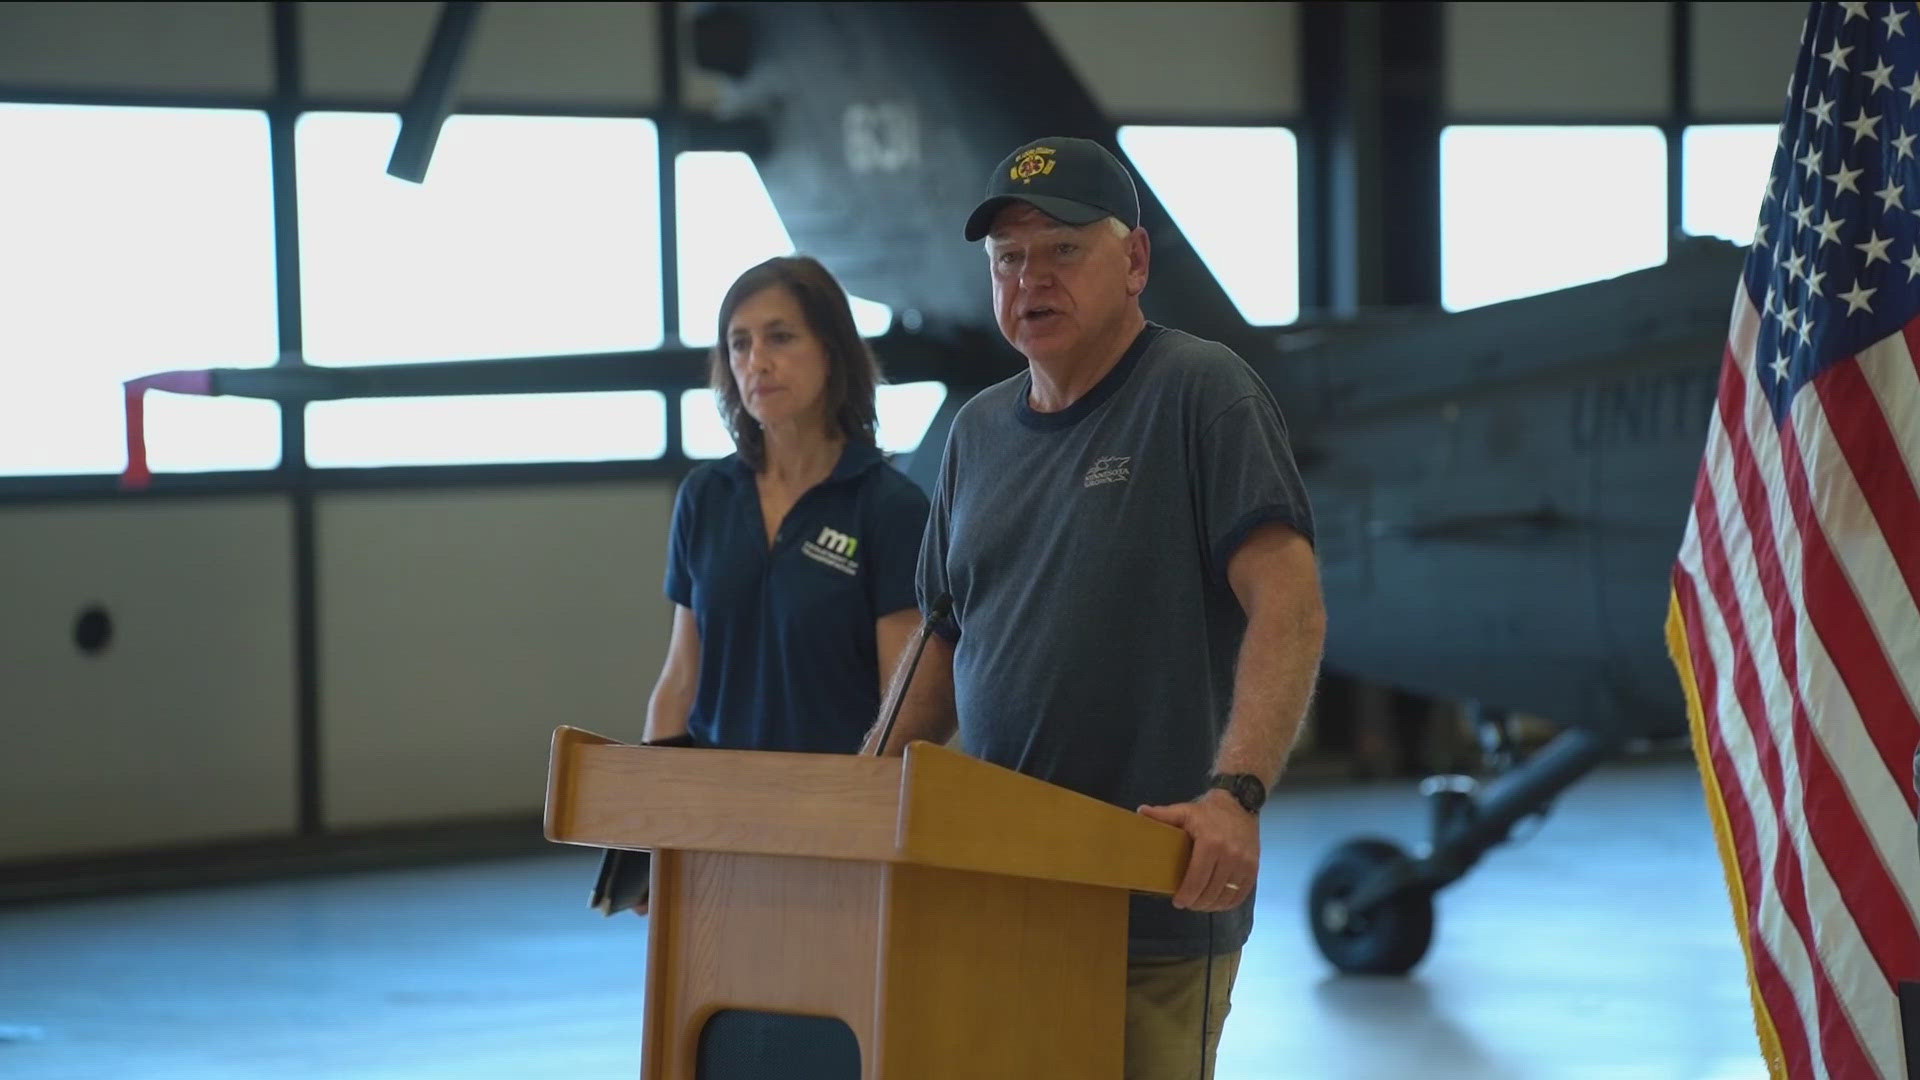 Governor Tim Walz and Senator Amy Klobuchar, along with the heads of several state agencies, got an aerial view of flooding damage in south central Minnesota Tuesday